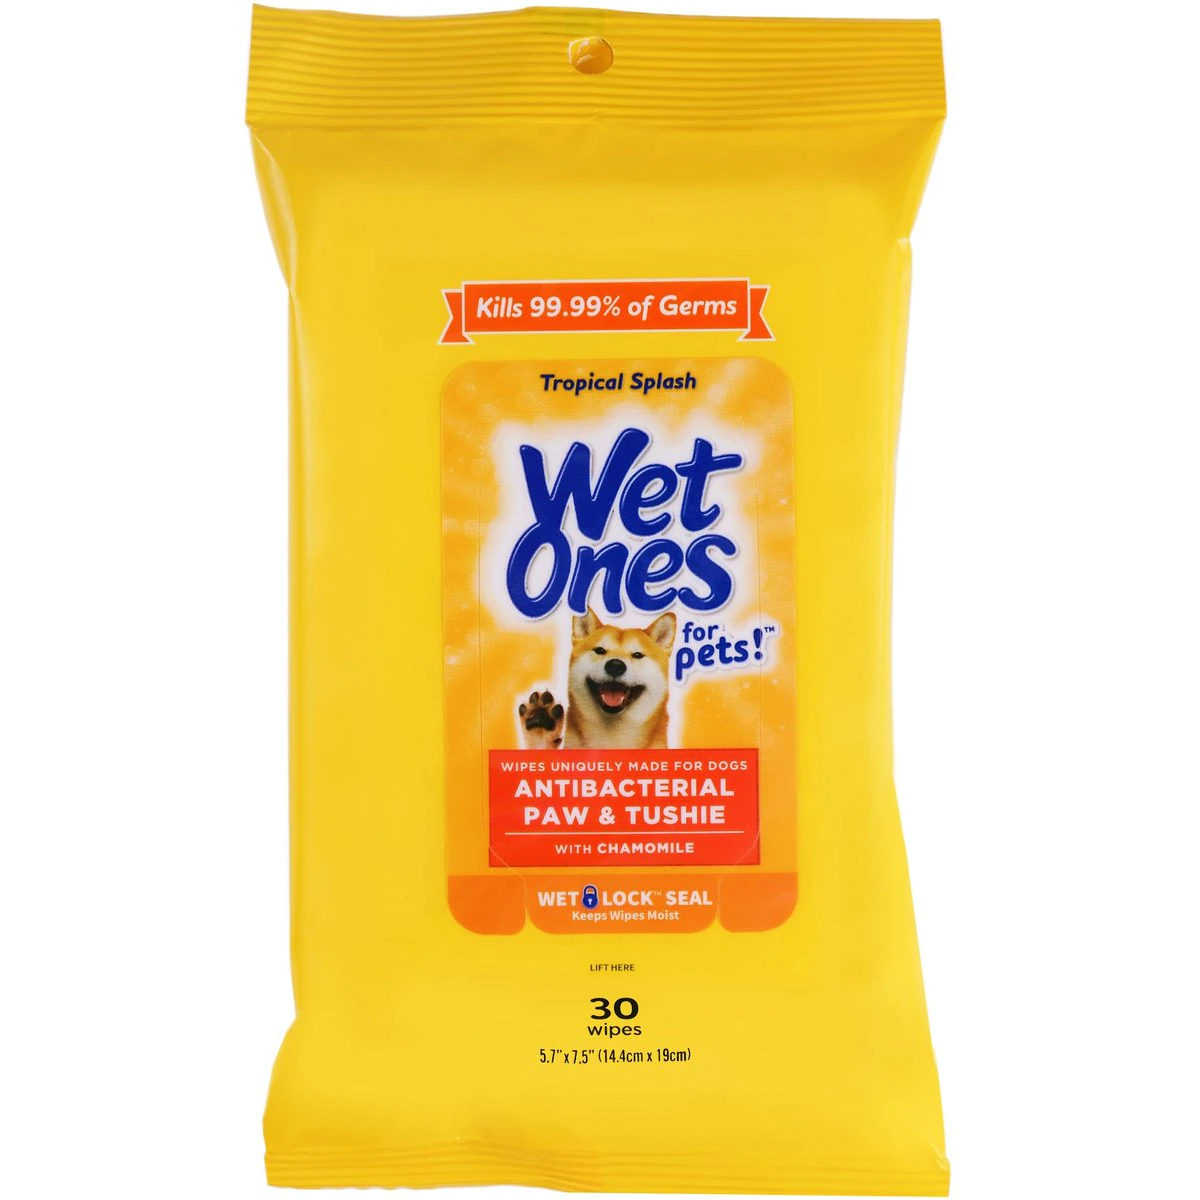 Wet Ones Anti-Bacterial Paw & Tushie Dog Wipes